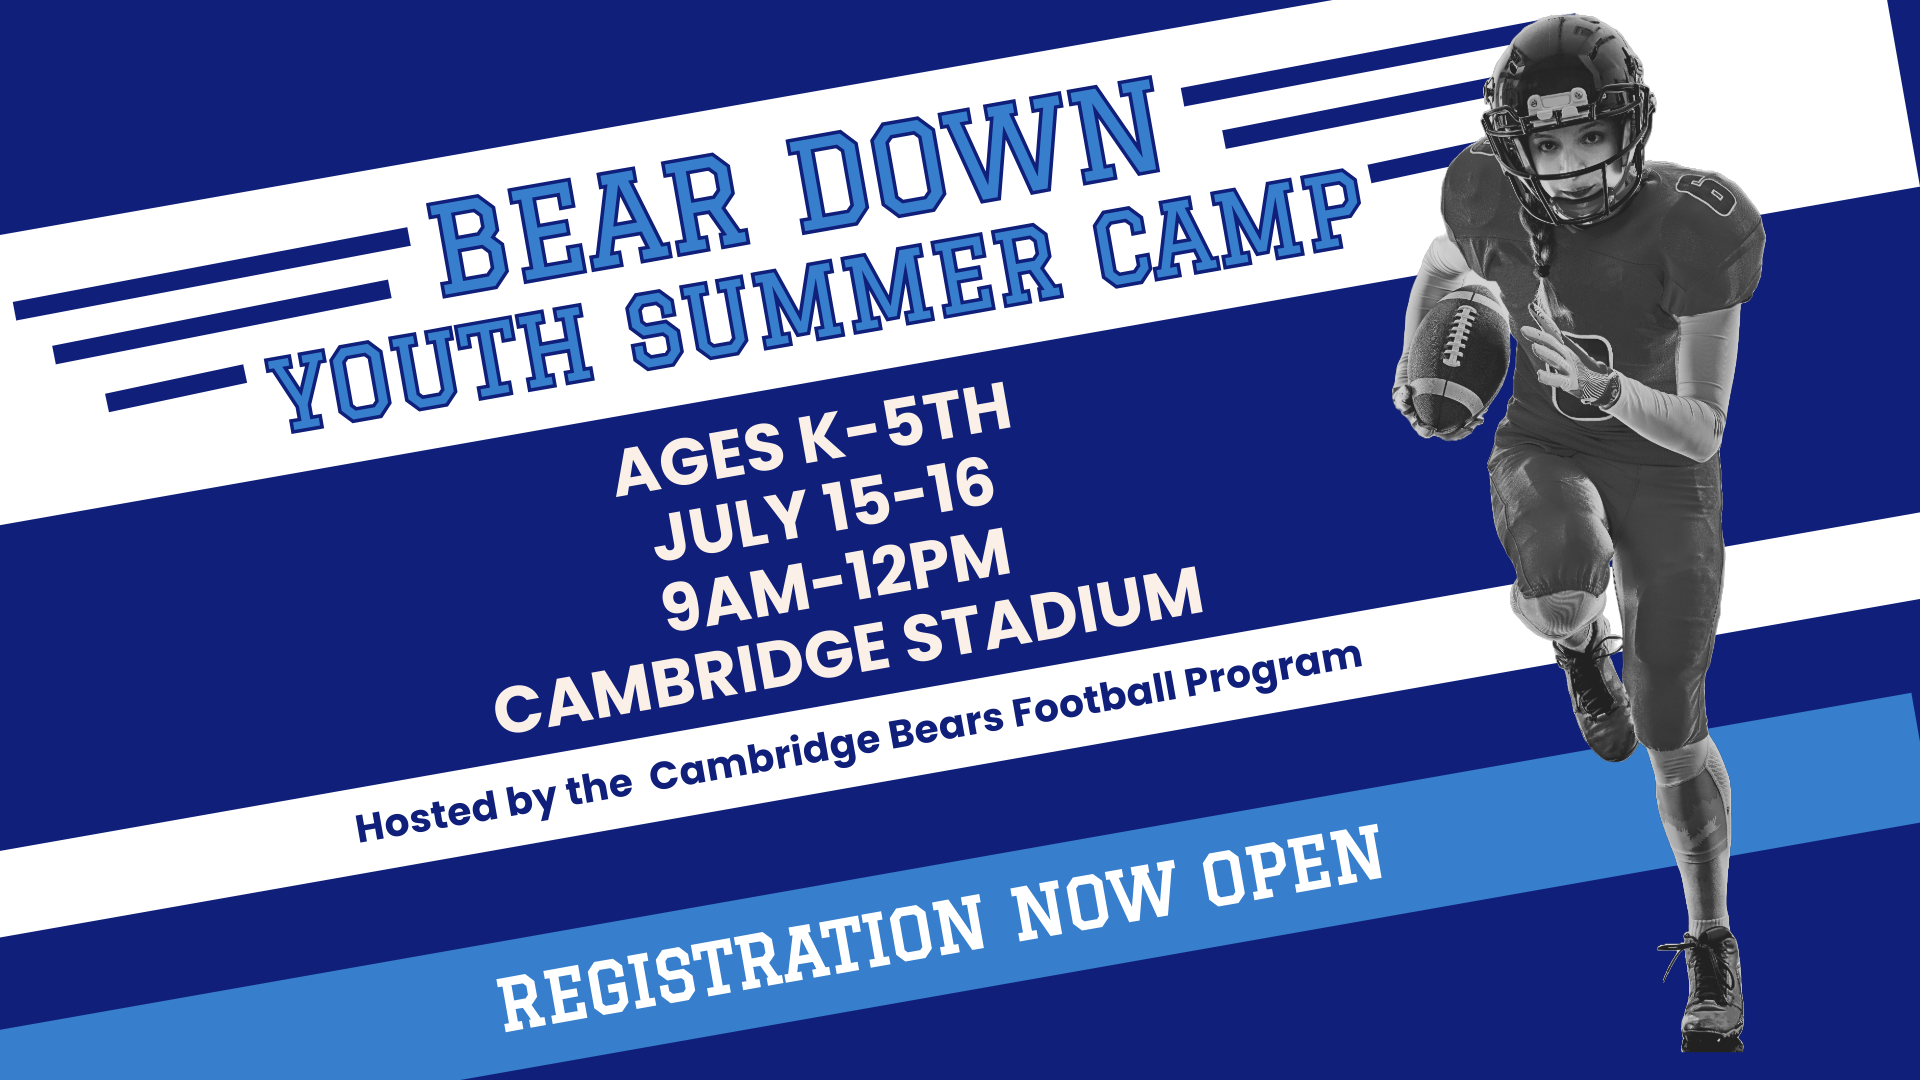 Registration Now Open for Bear Down Youth Summer Camp